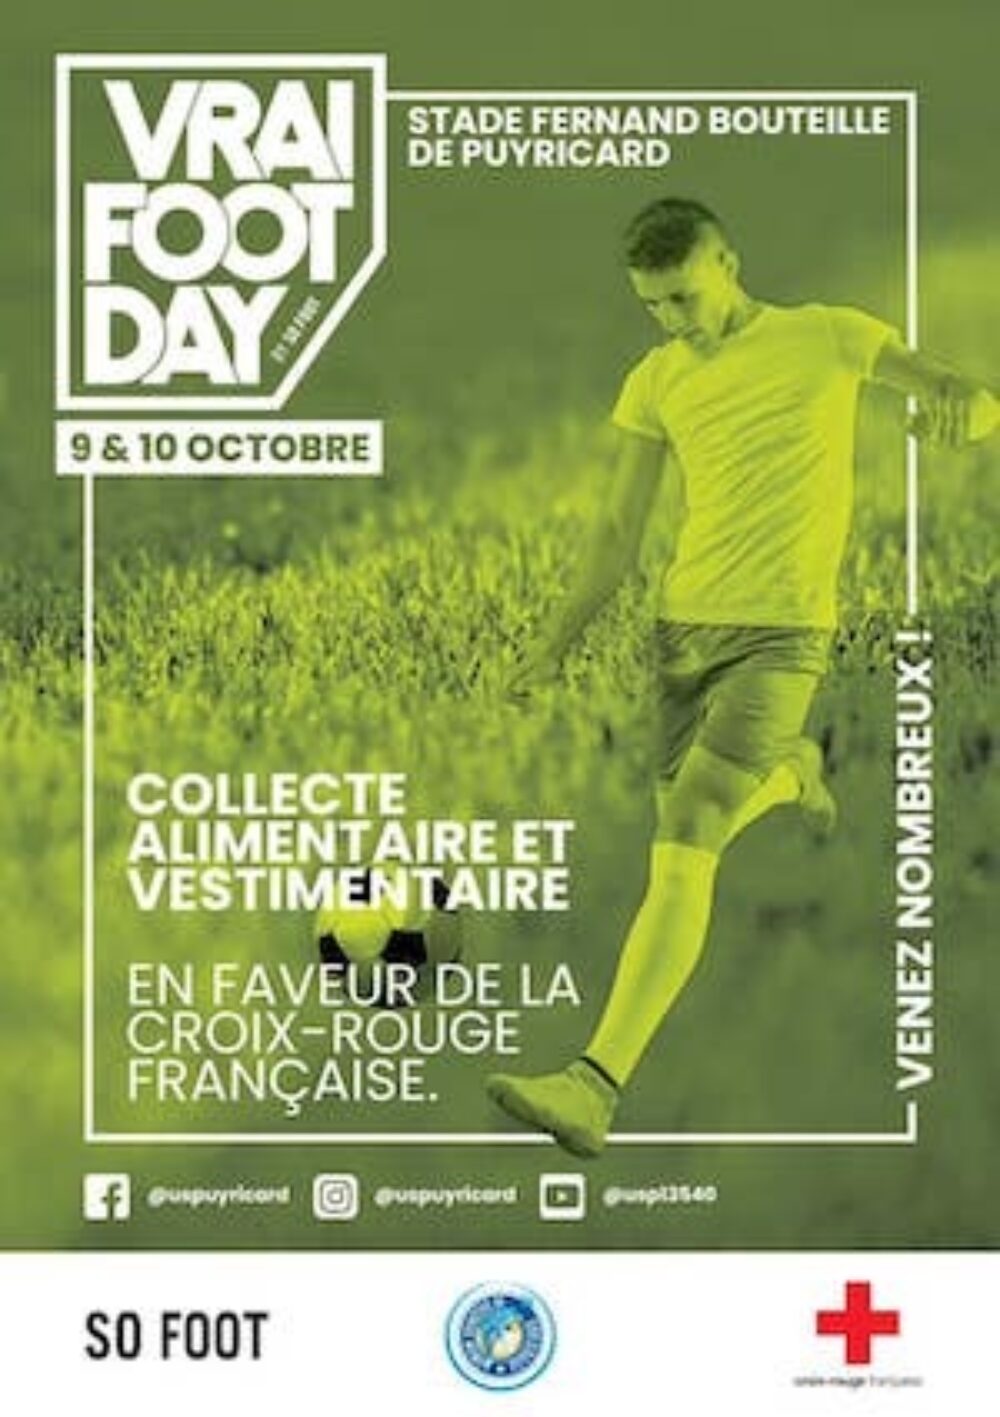 Actufoot • Vrai foot day puyricard